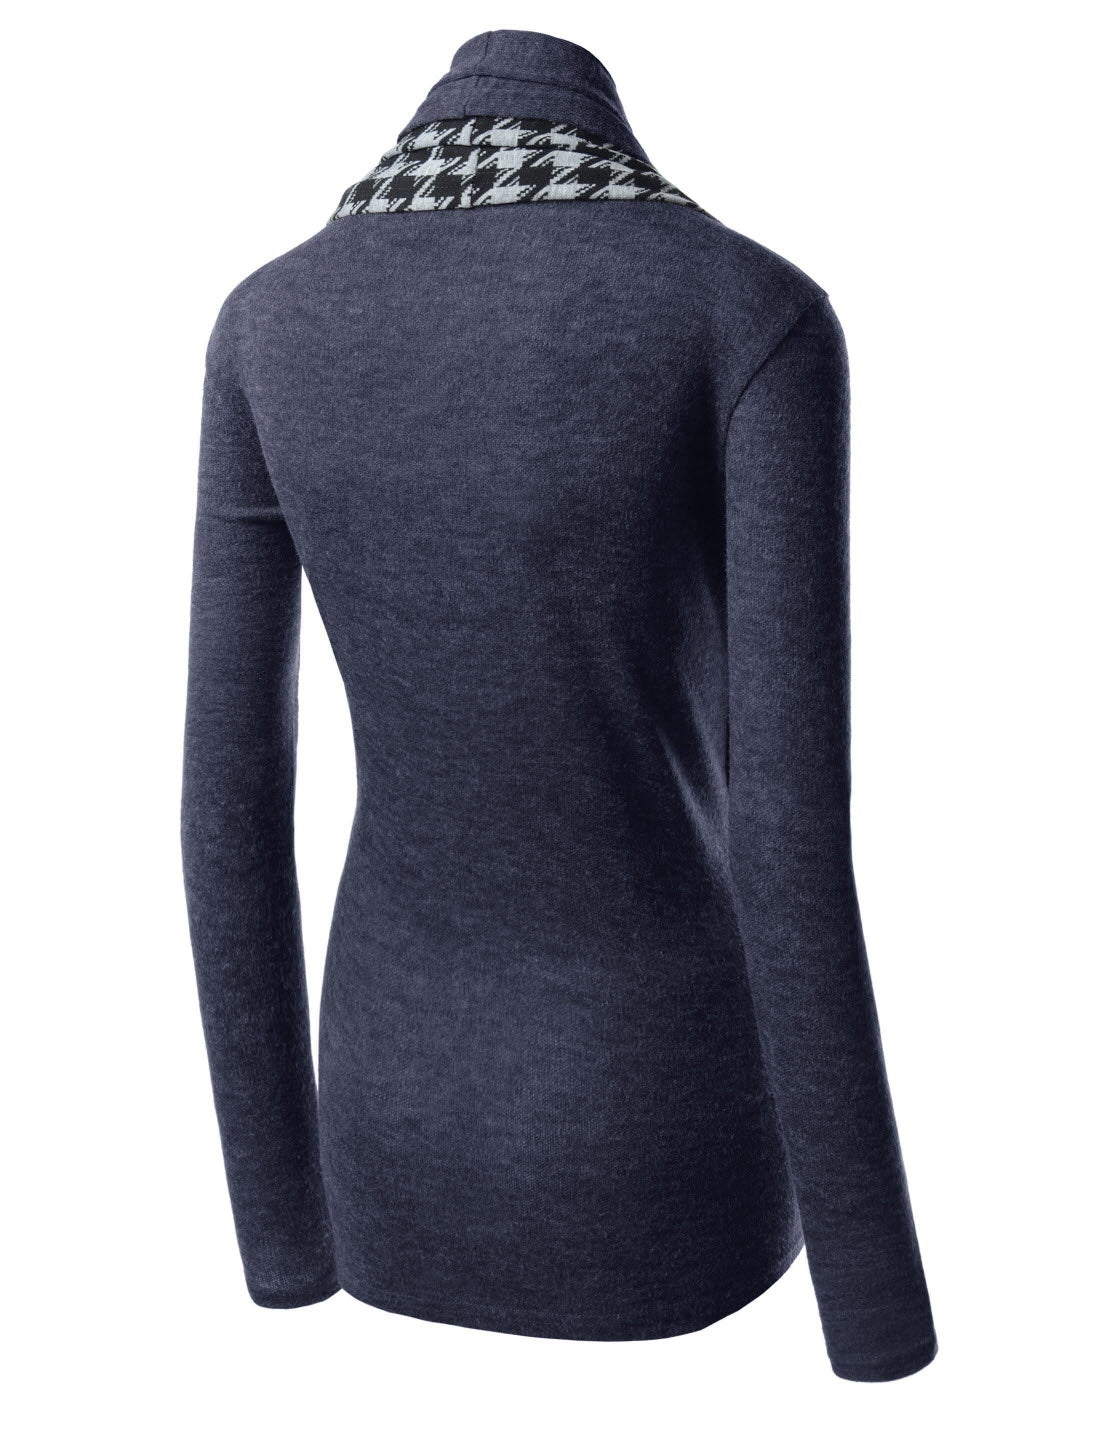 Navy Blue Houndstooth Shawl Collar Knitted Open Cardigans